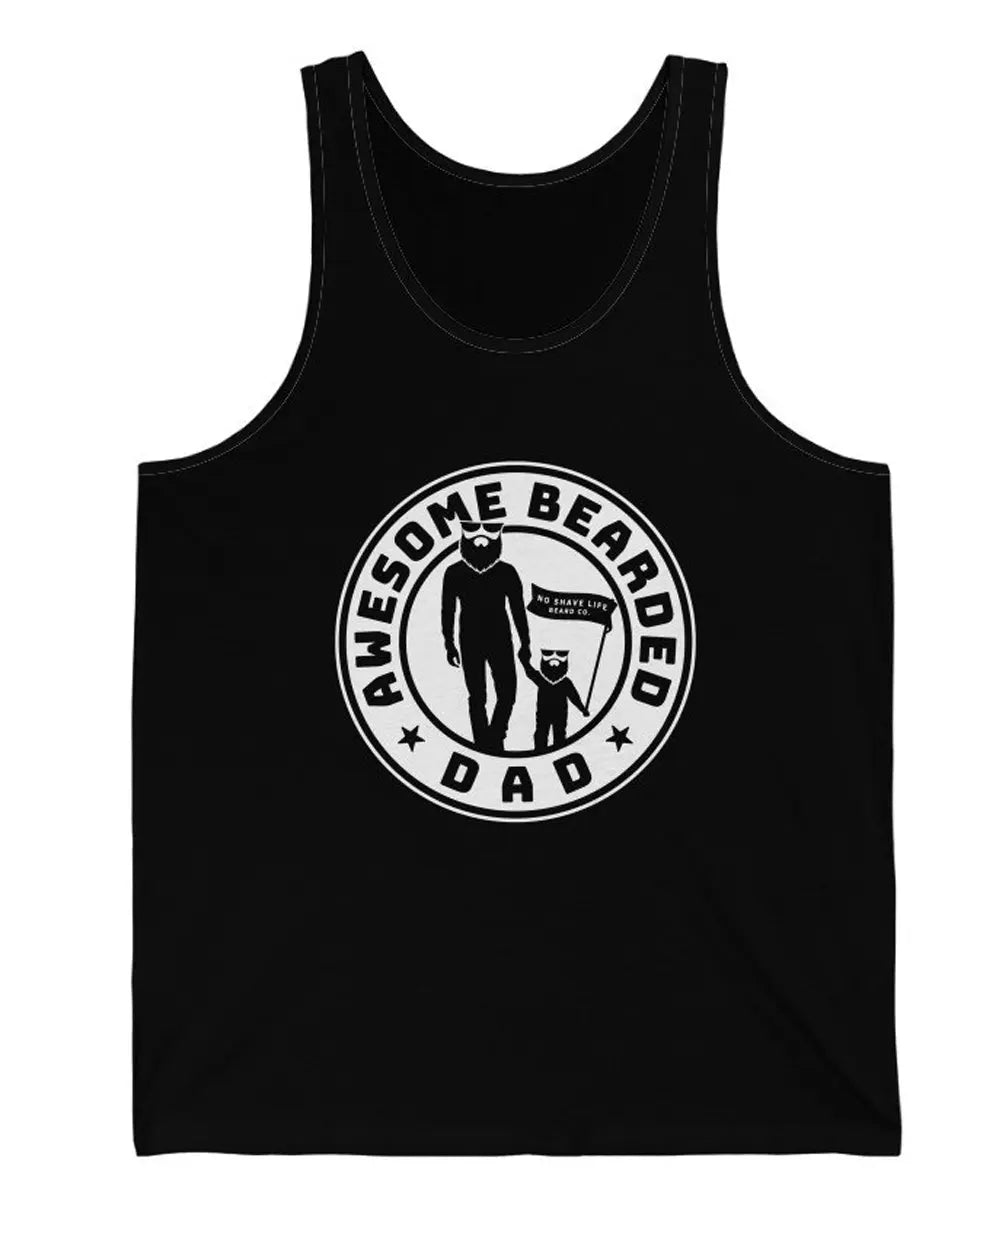 AWESOME BEARDED DAD Black Men's Tank Top|Mens Tank Top